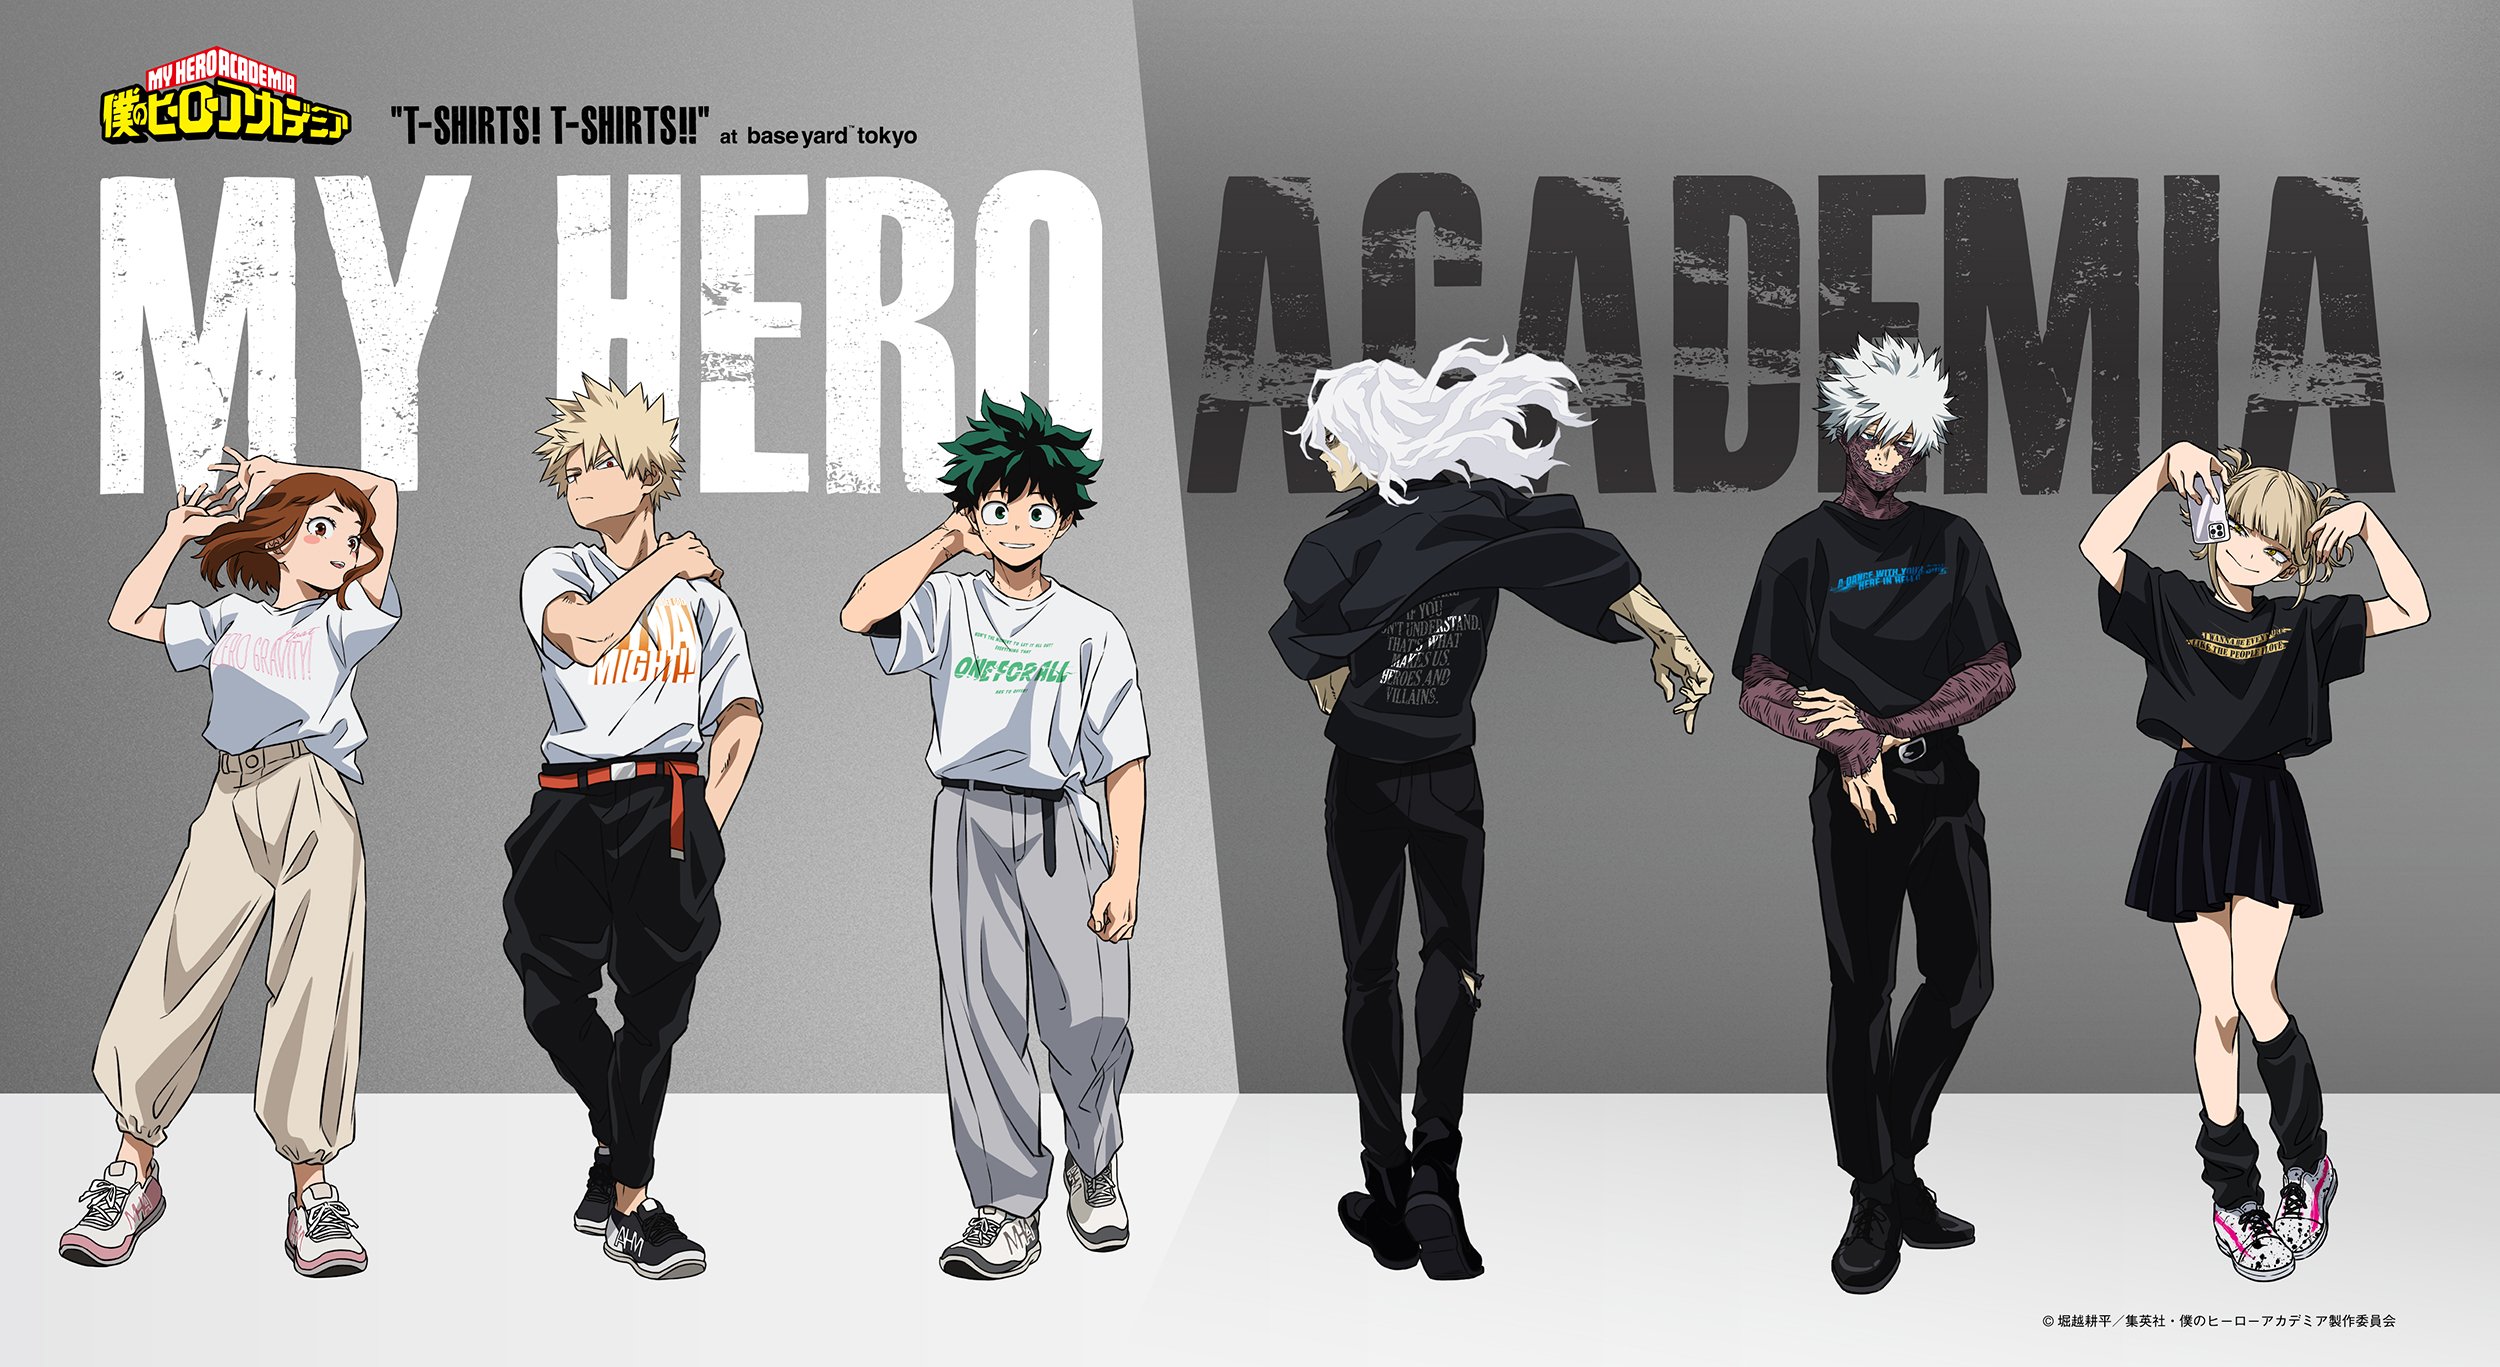 TVアニメ『僕のヒーローアカデミア』SPECIAL POPUP「MY HERO ACADEMIA“T-shirts! T-shirts!!”」